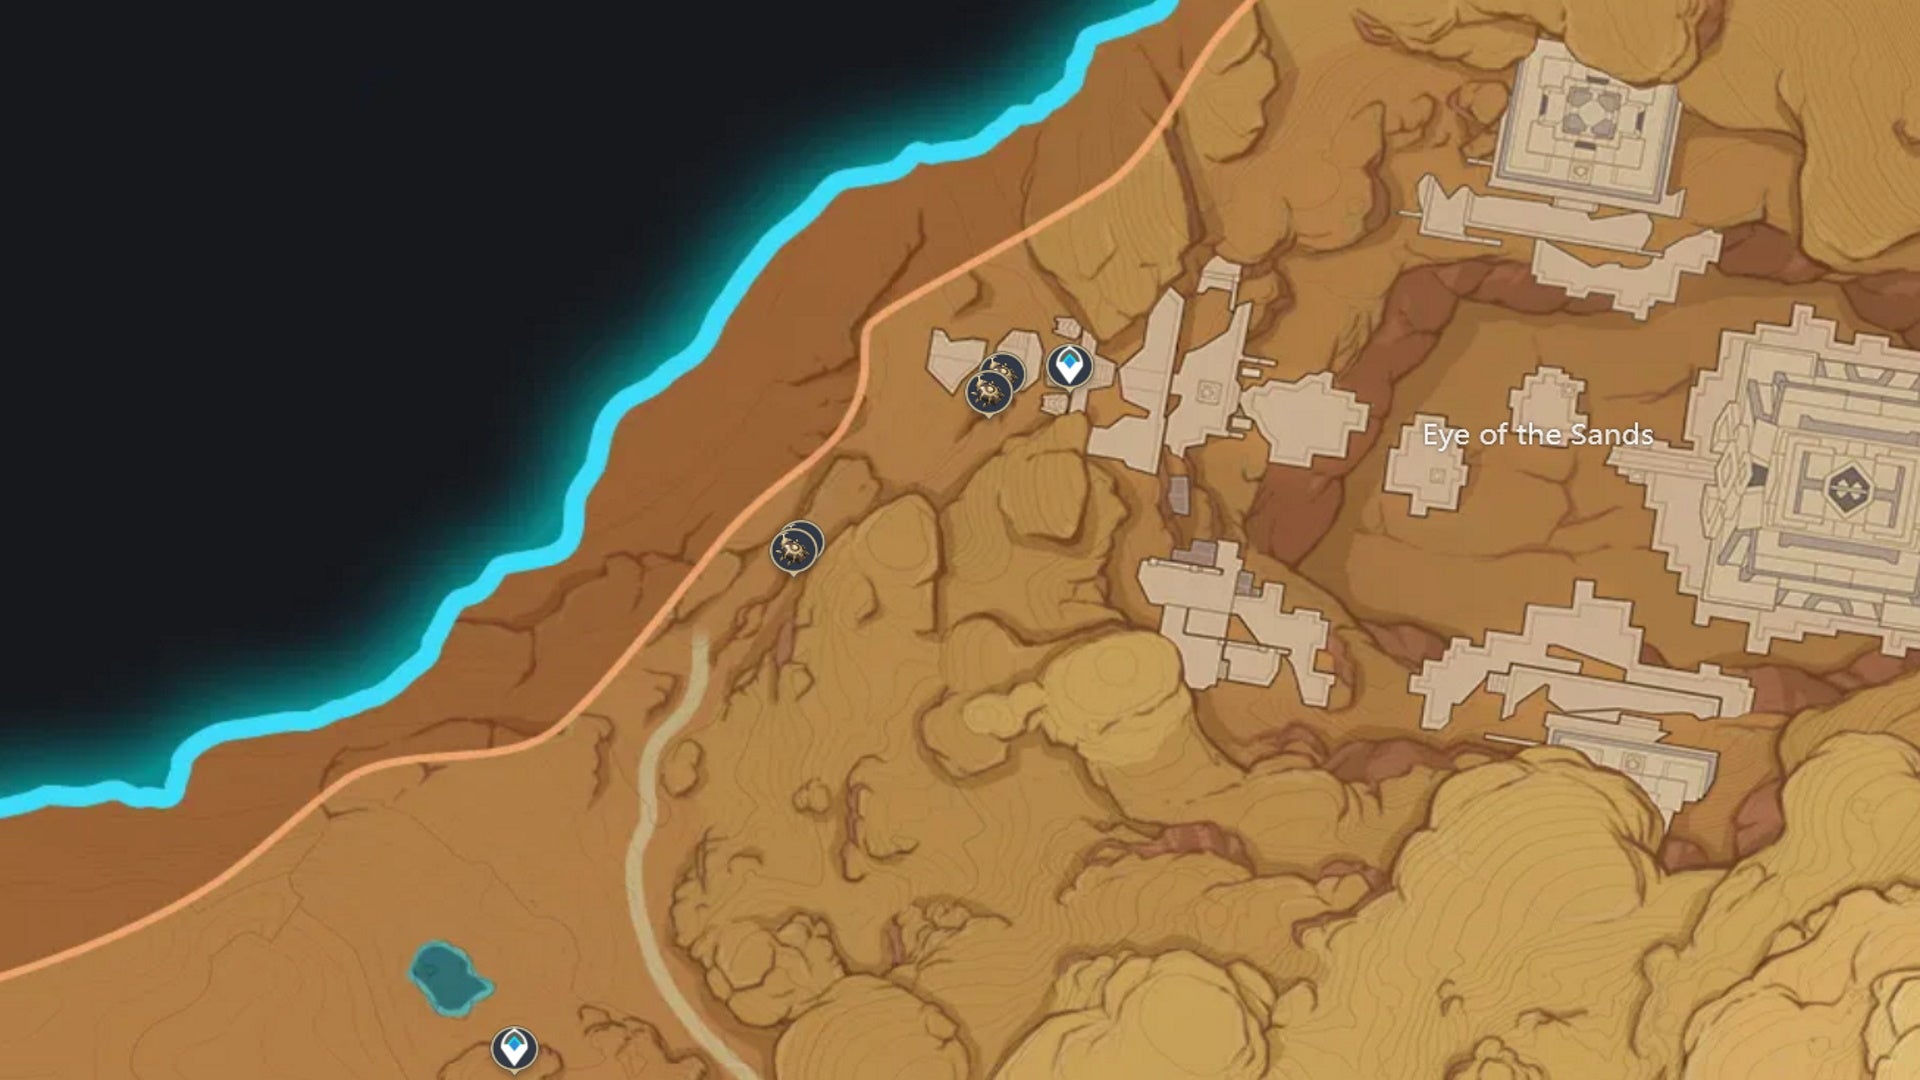 Genshin Impact Scarab locations: A map image showing Eye of the Sands scarab locations